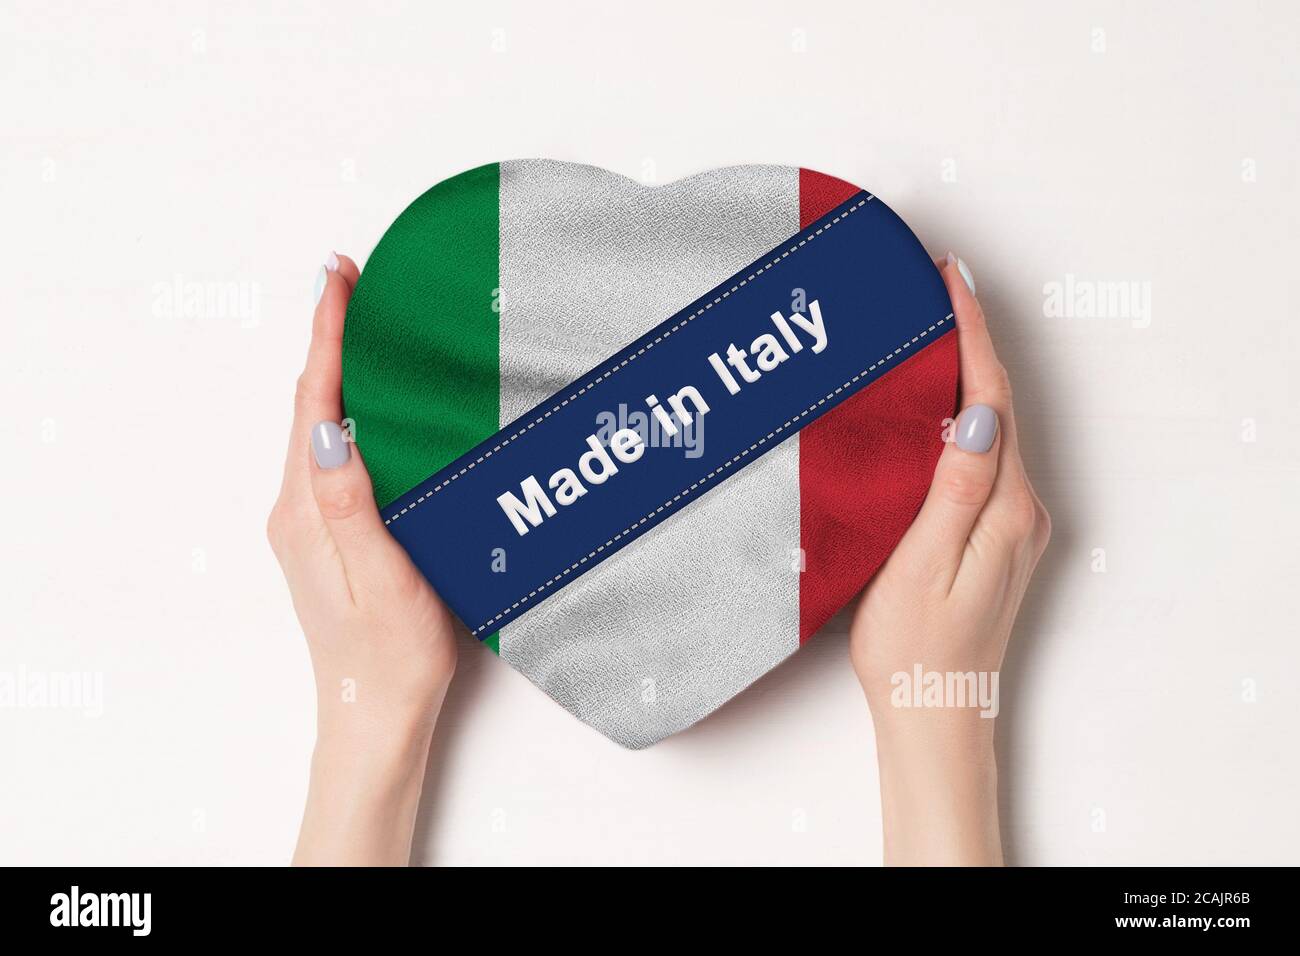 Inscription Made in Italy the flag of Italy. Female hands holding a heart shaped box. White background. Stock Photo